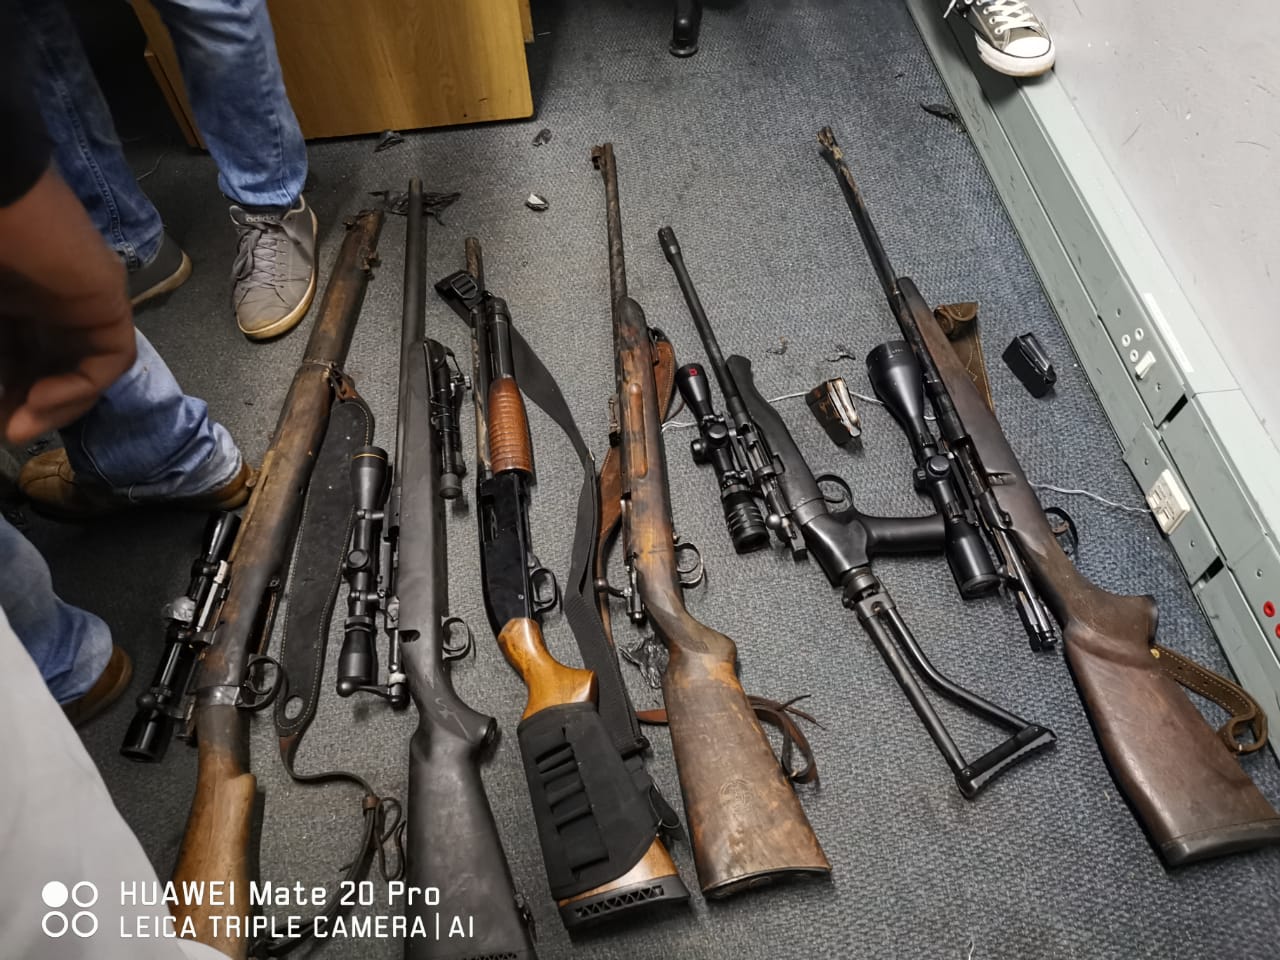 Illegal firearms uncovered after tip-off